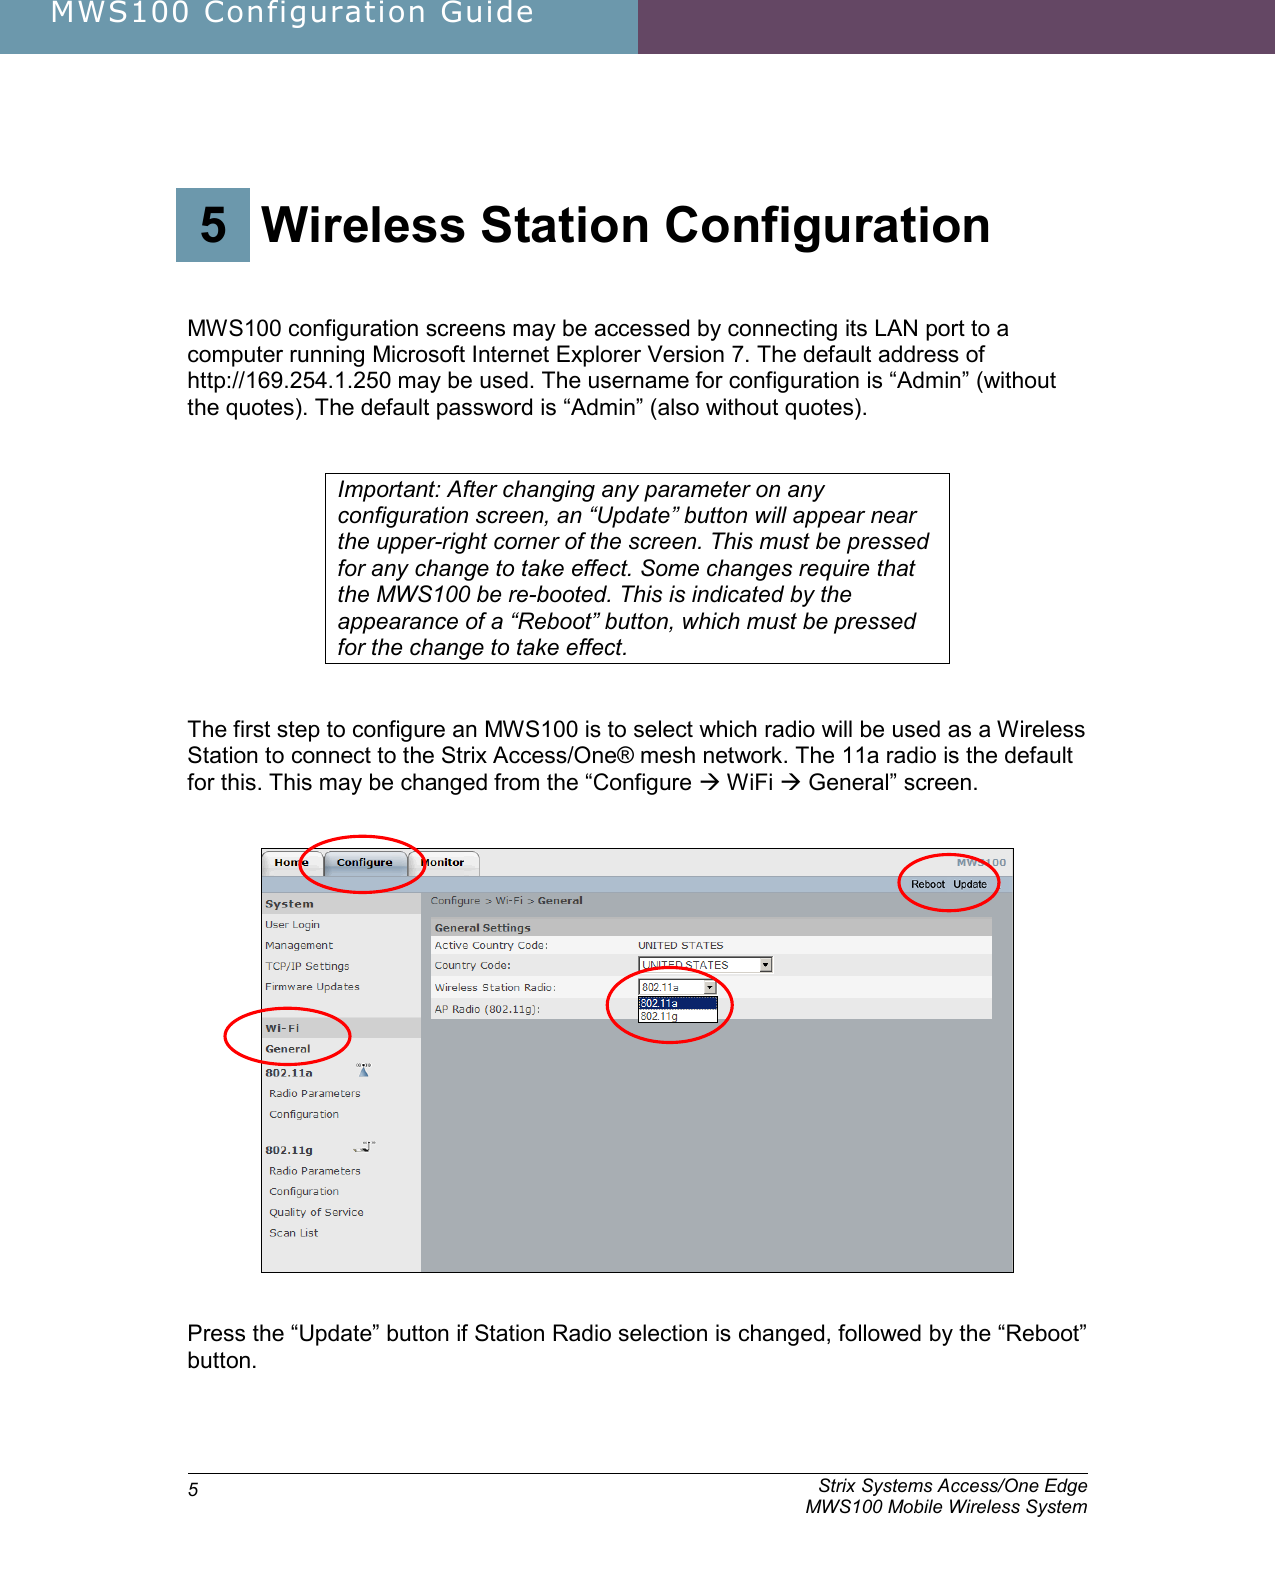 MWS100 Configuration Guide               Strix Systems Access/One Edge     MWS100 Mobile Wireless System 53.  Wireless Station Configuration 5 Wireless Station Configuration   MWS100 configuration screens may be accessed by connecting its LAN port to a computer running Microsoft Internet Explorer Version 7. The default address of http://169.254.1.250 may be used. The username for configuration is “Admin” (without the quotes). The default password is “Admin” (also without quotes).   Important: After changing any parameter on any configuration screen, an “Update” button will appear near the upper-right corner of the screen. This must be pressed for any change to take effect. Some changes require that the MWS100 be re-booted. This is indicated by the appearance of a “Reboot” button, which must be pressed for the change to take effect.    The first step to configure an MWS100 is to select which radio will be used as a Wireless Station to connect to the Strix Access/One® mesh network. The 11a radio is the default for this. This may be changed from the “Configure  WiFi  General” screen.      Press the “Update” button if Station Radio selection is changed, followed by the “Reboot” button.  